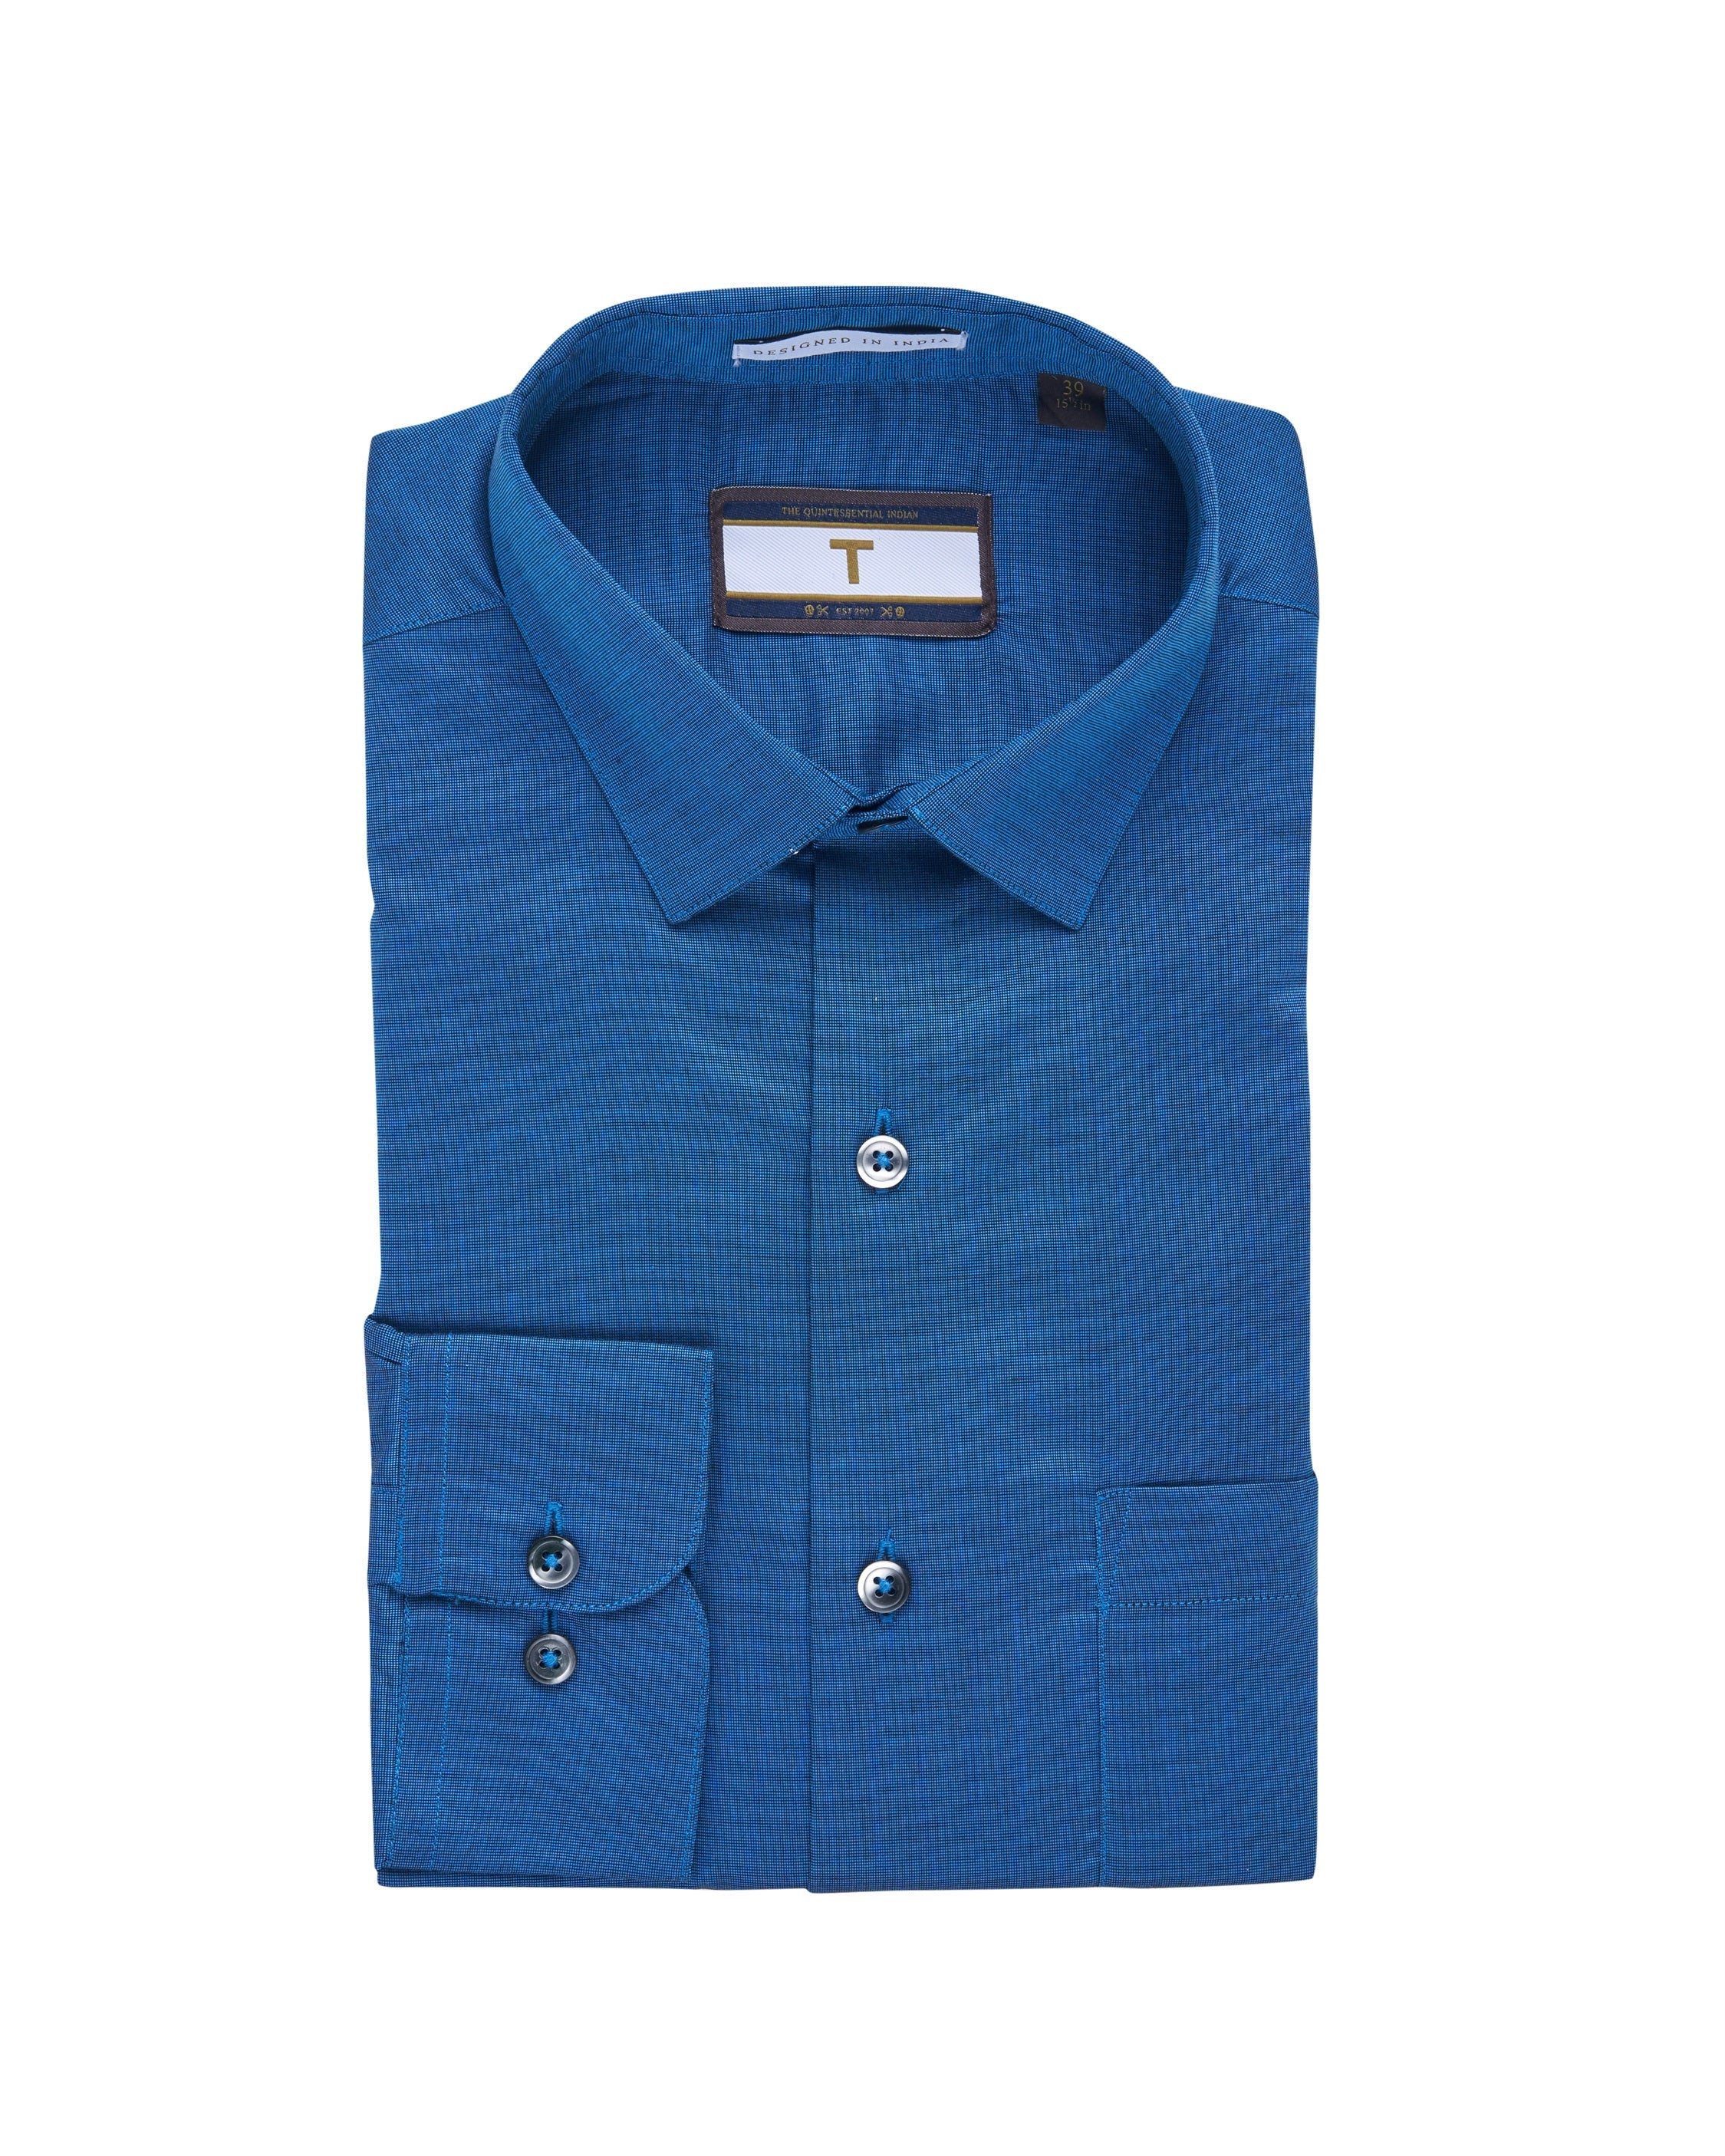 T the brand Pick & Pick Cotton Slim fit Shirt with Full-Sleeves - Teal Blue